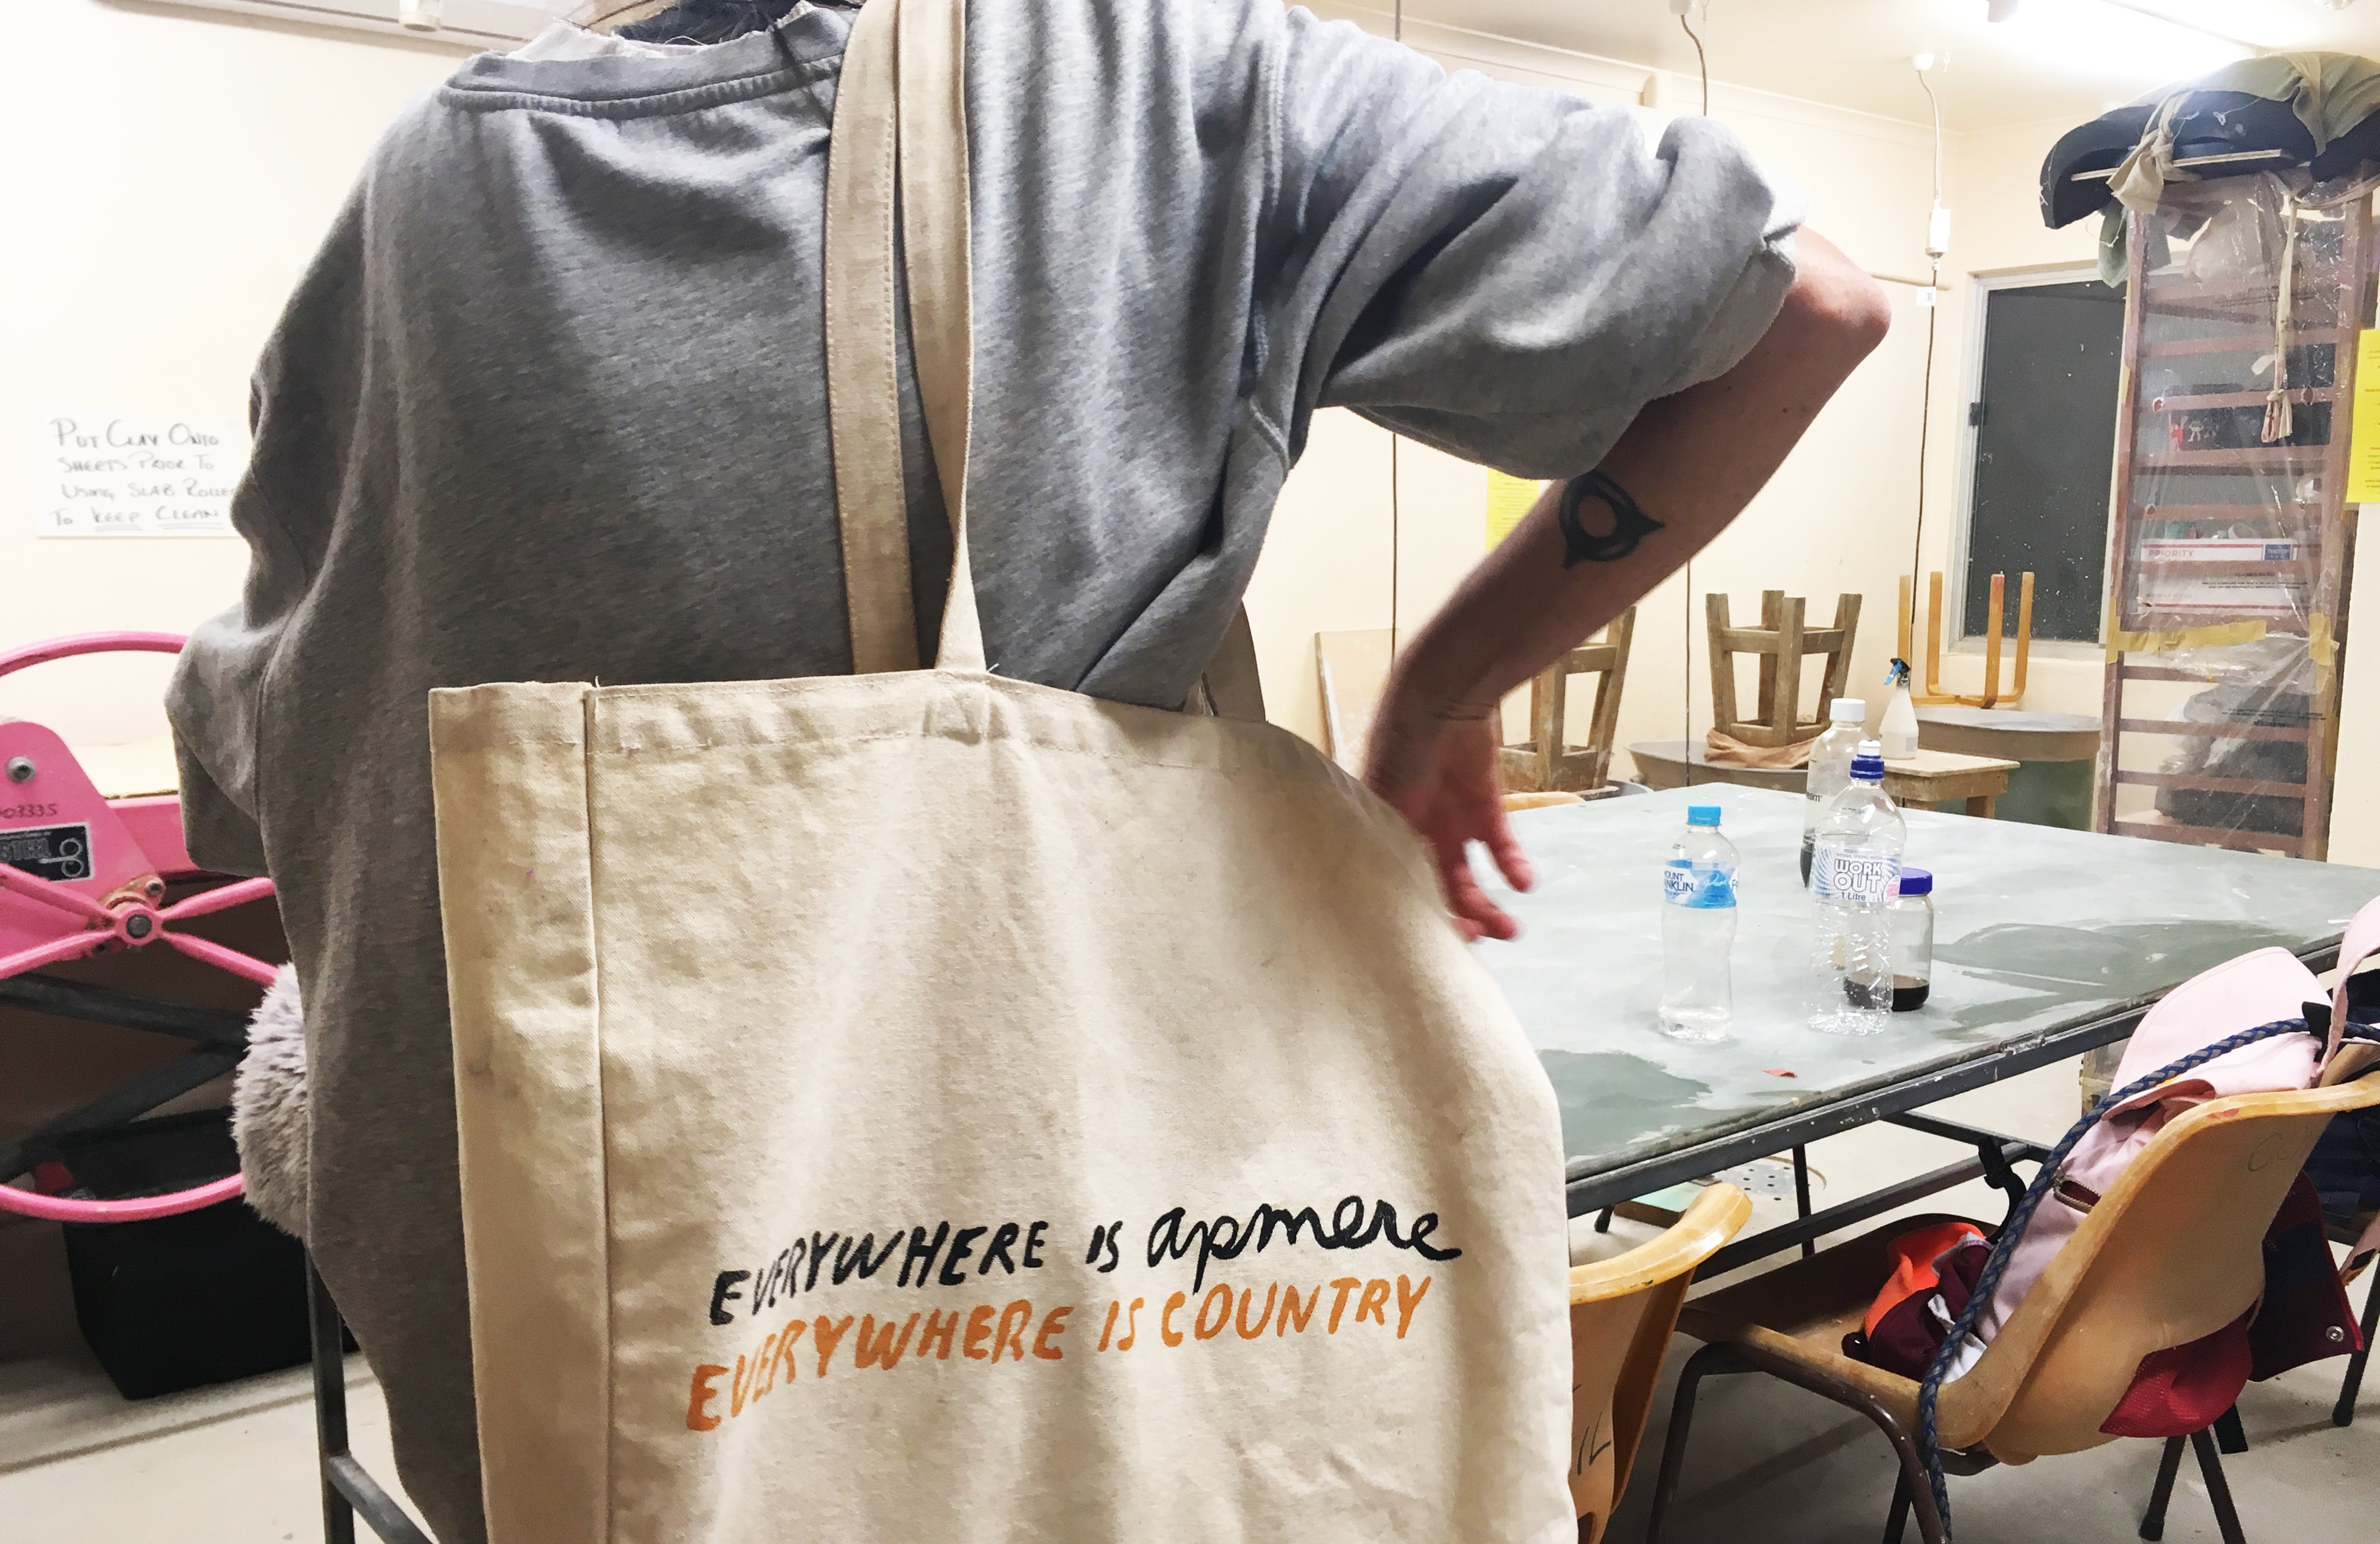 Image 04: ‘Everywhere is ampere - everywhere is country’ bag produced as project merchandise. Photo: Beth Sometimes.